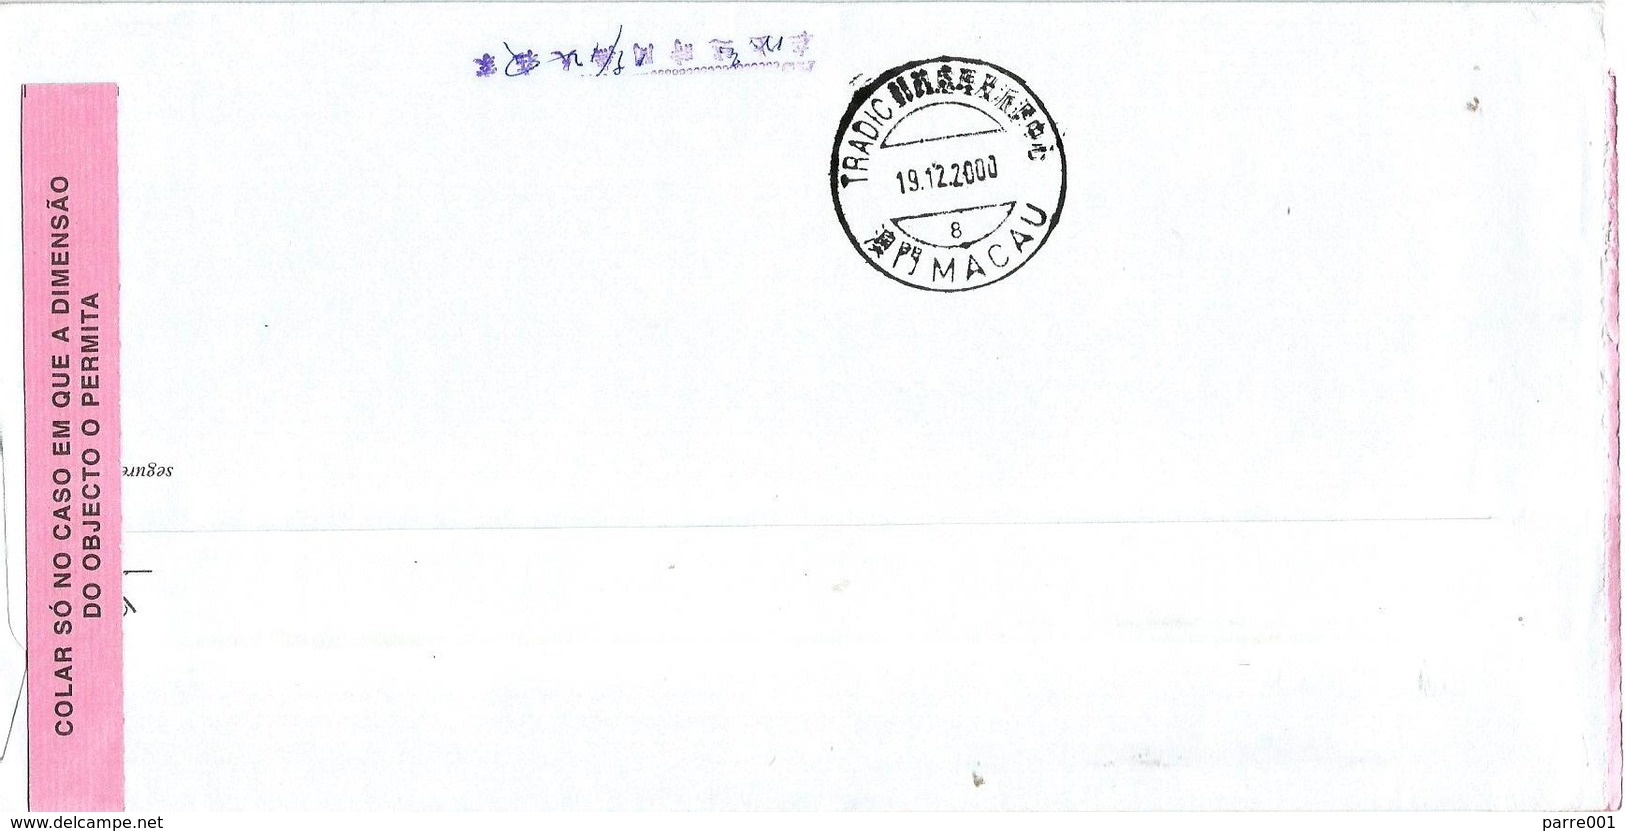 Macau 2000 Lisbon Meter Franking Postage Paid Unfranked Registered AR Cover - Lettres & Documents